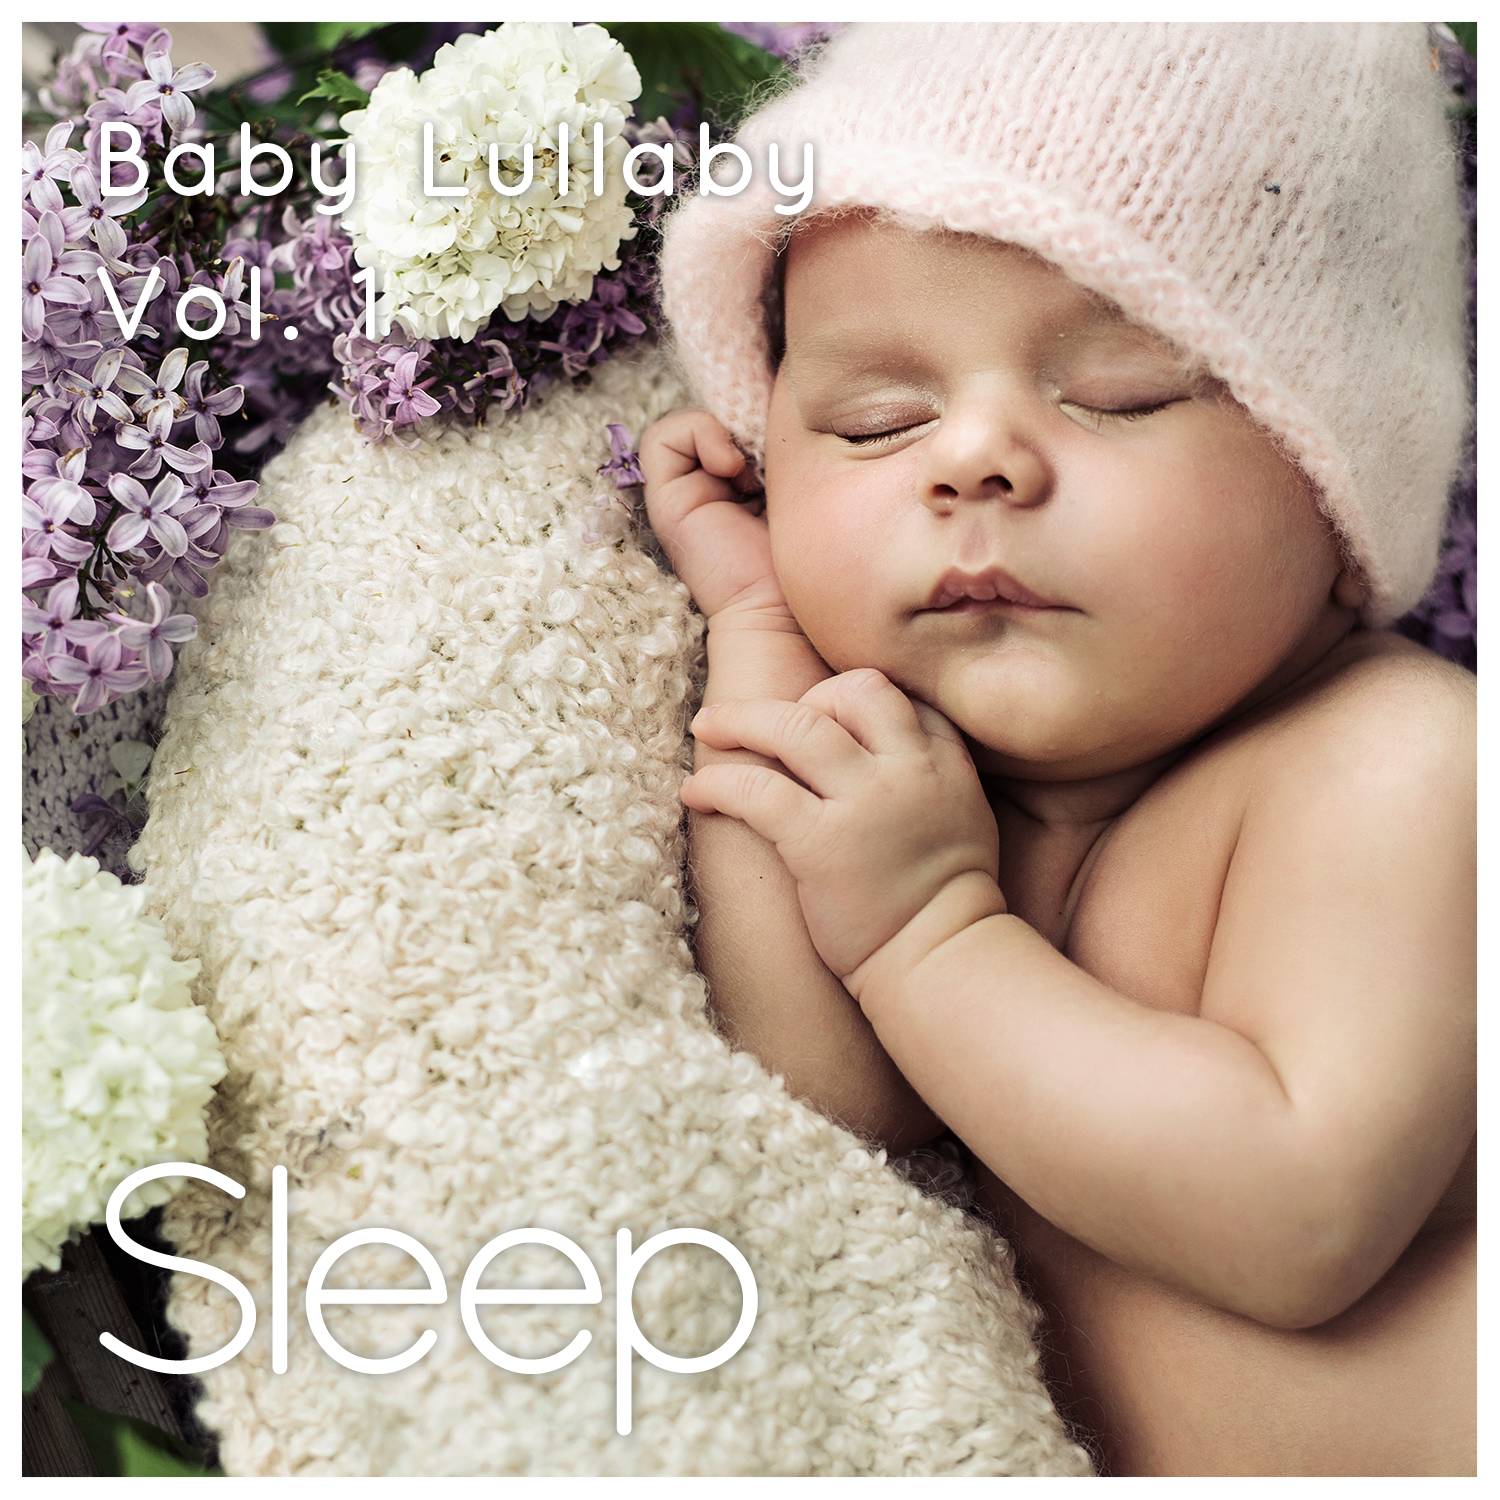 Baby Sleep Ambient Lullaby, Pt. 5